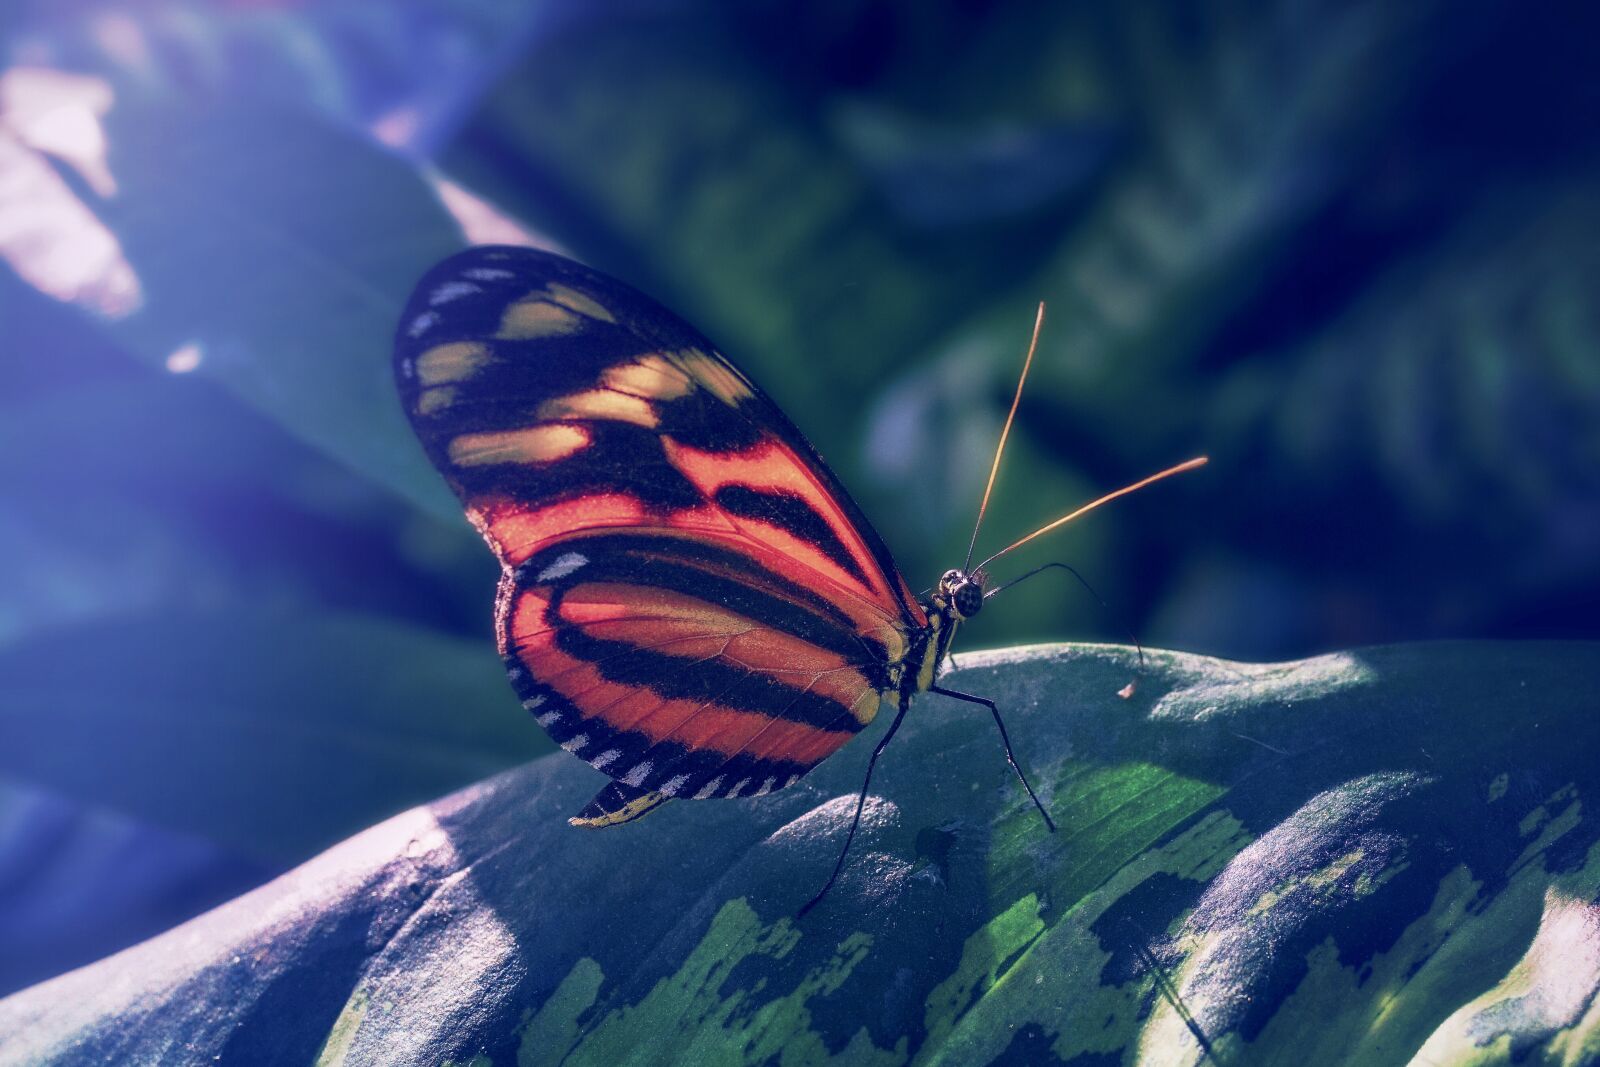 35mm F1.4 sample photo. Butterfly, tropical, edelfalter photography